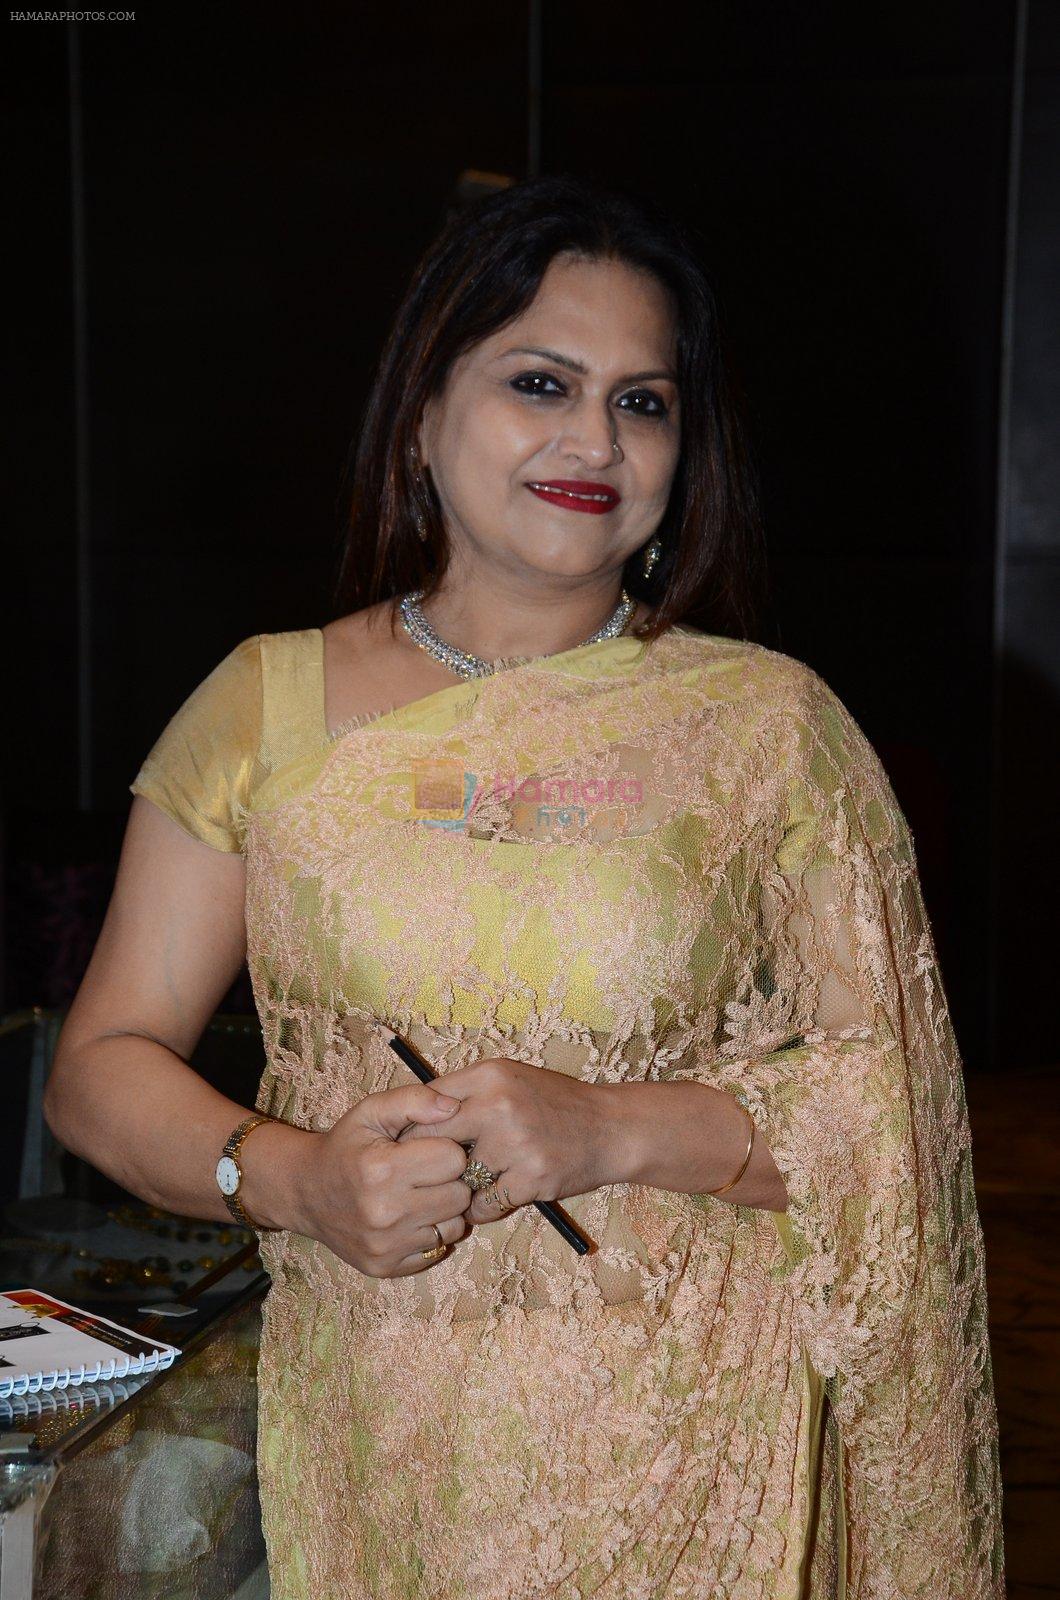 Ananya Banerjee at the Retail Jeweller India Awards 2016 - grand jury meet event on 26th July 2016